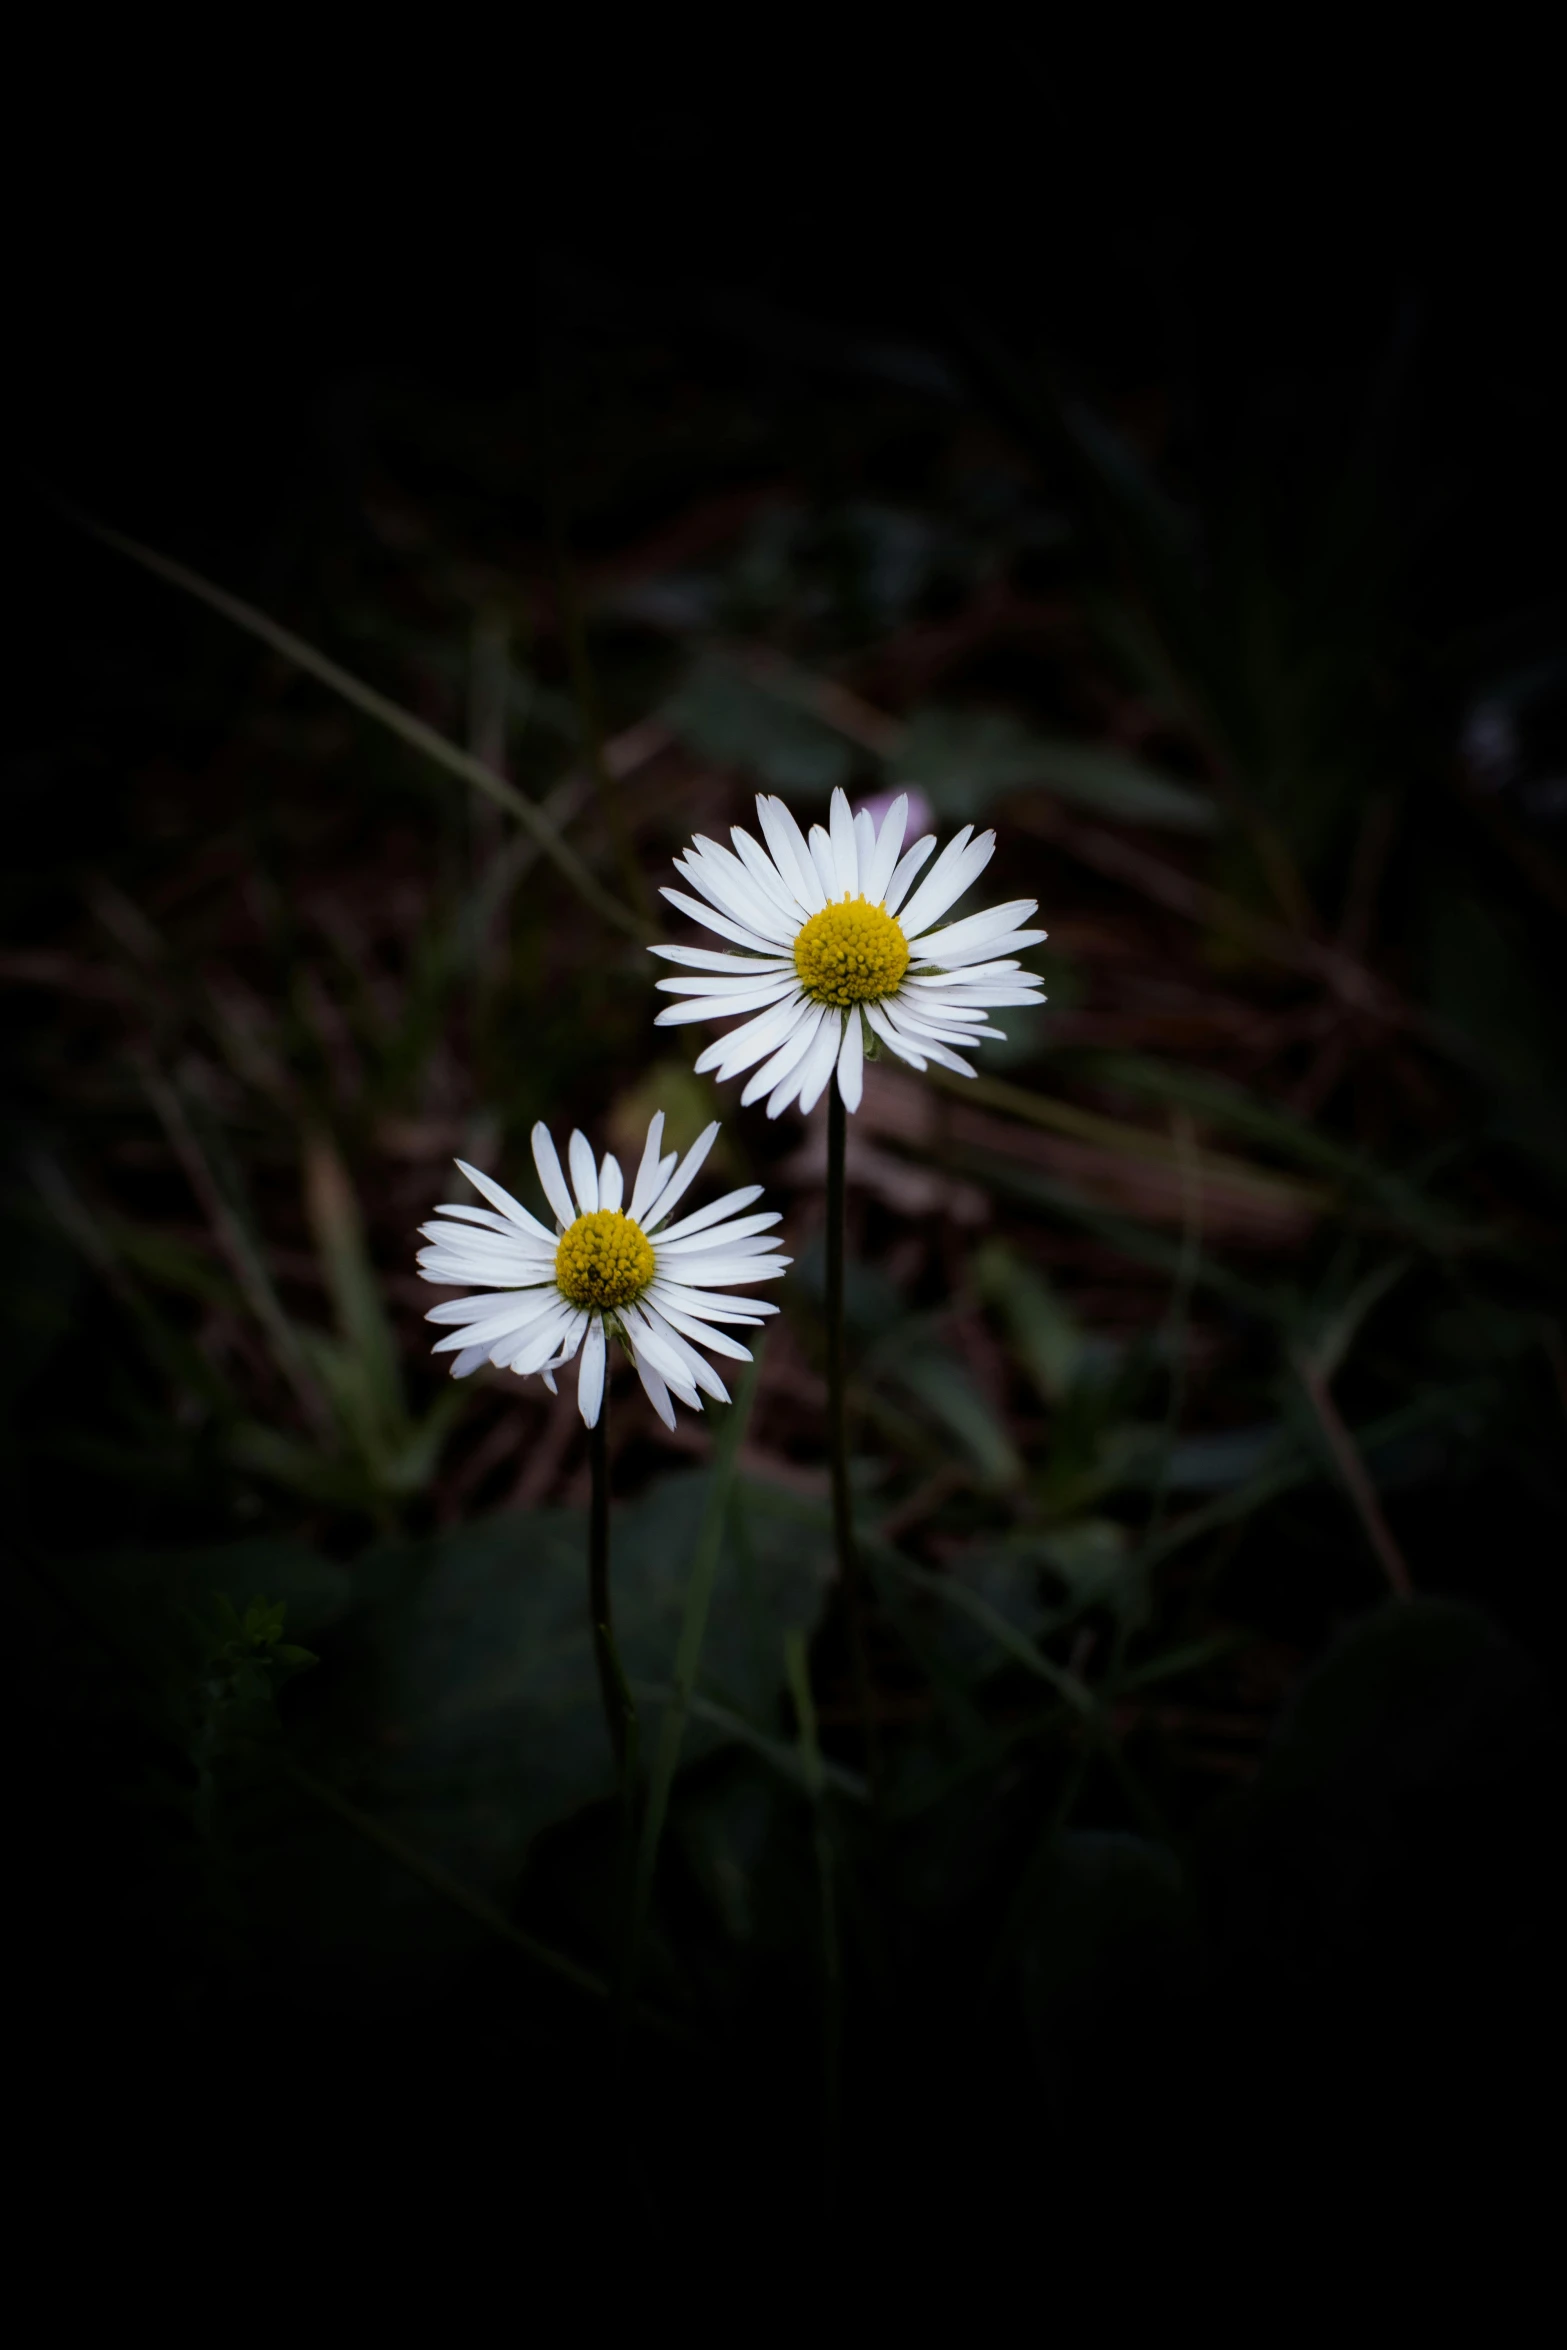 three white daisies that have yellow centers in the dark